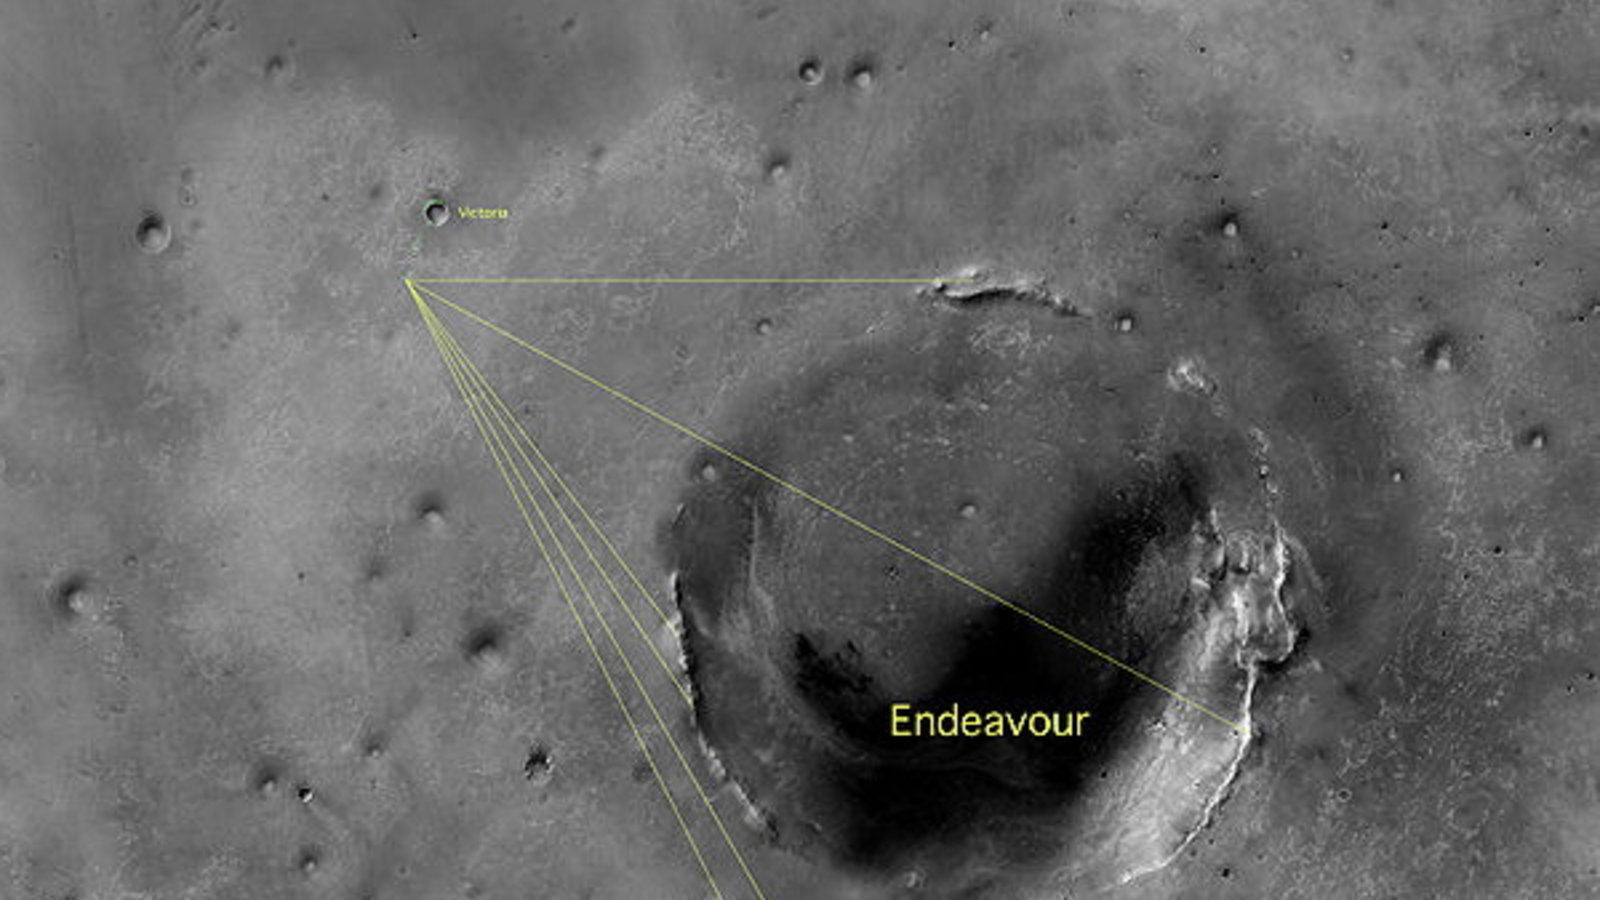 772px-endeavour_crater_annotated_2009-03-07.jpg